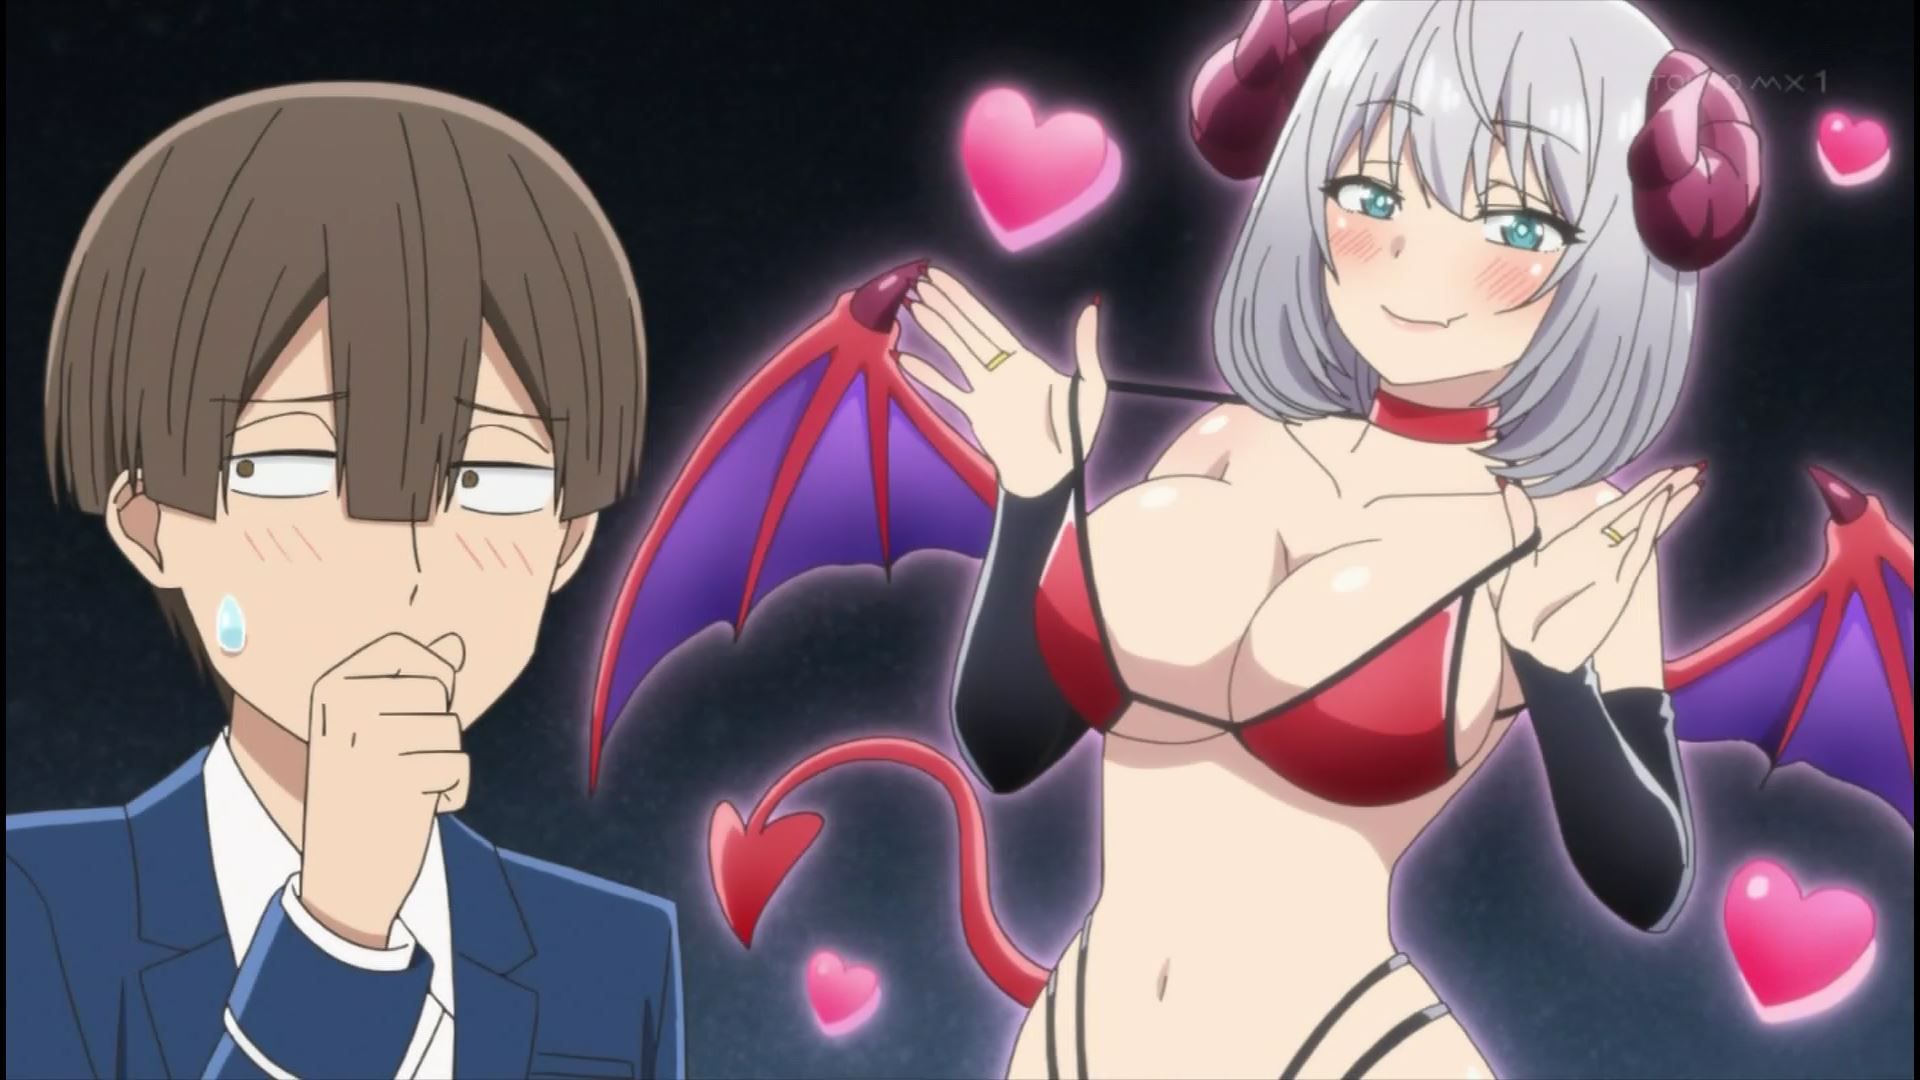 Anime [Magic Senior] 2 episodes wet through and pants full view, erotic costumes and such as very erotic scene 8